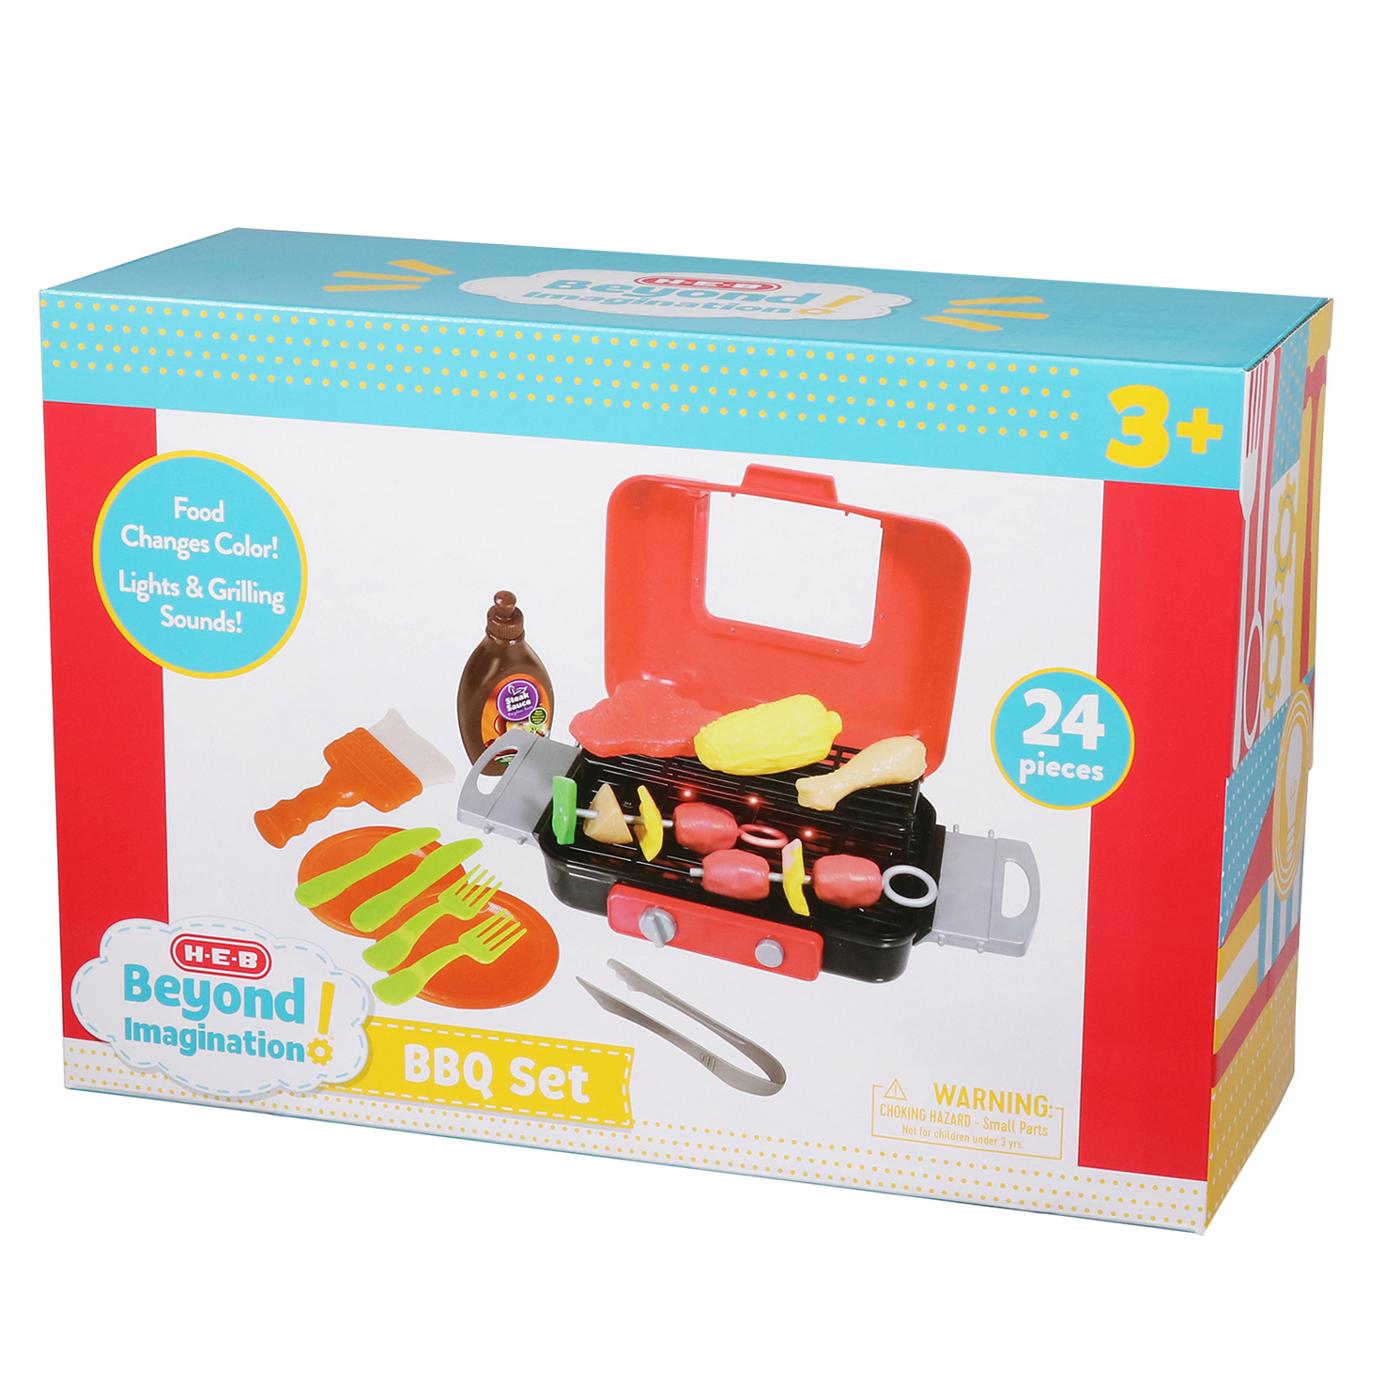 H-E-B Beyond Imagination! BBQ Grill Playset; image 3 of 3